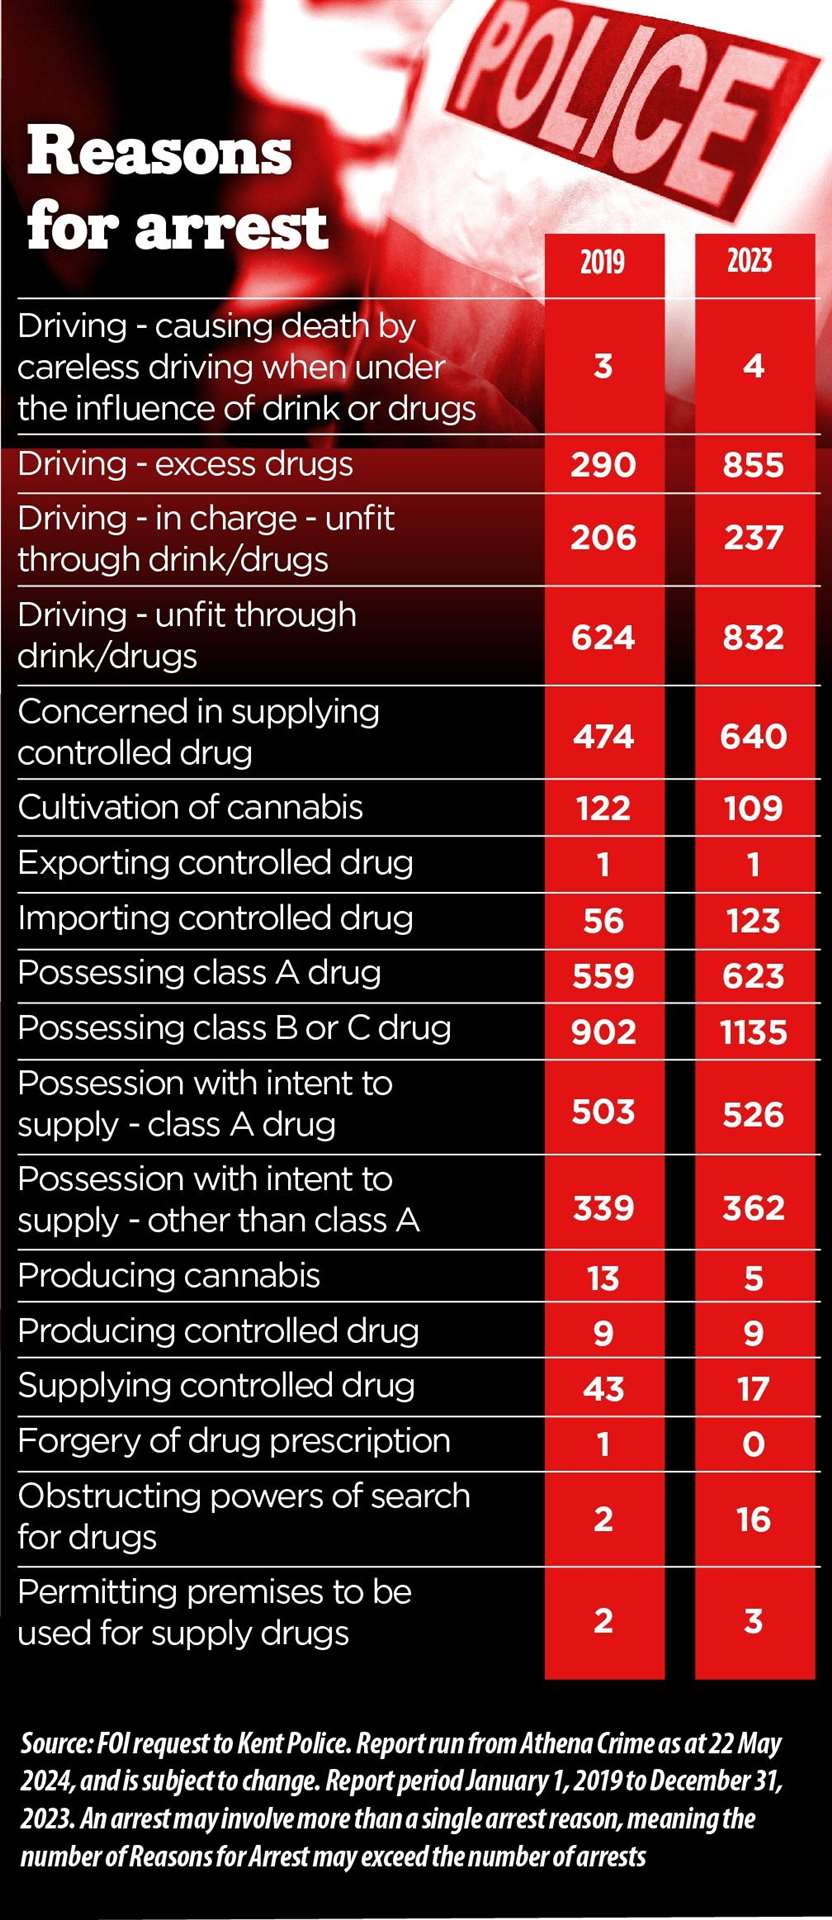 Possession of Class B or C drugs was the most common reason for arrests involving drugs across the county